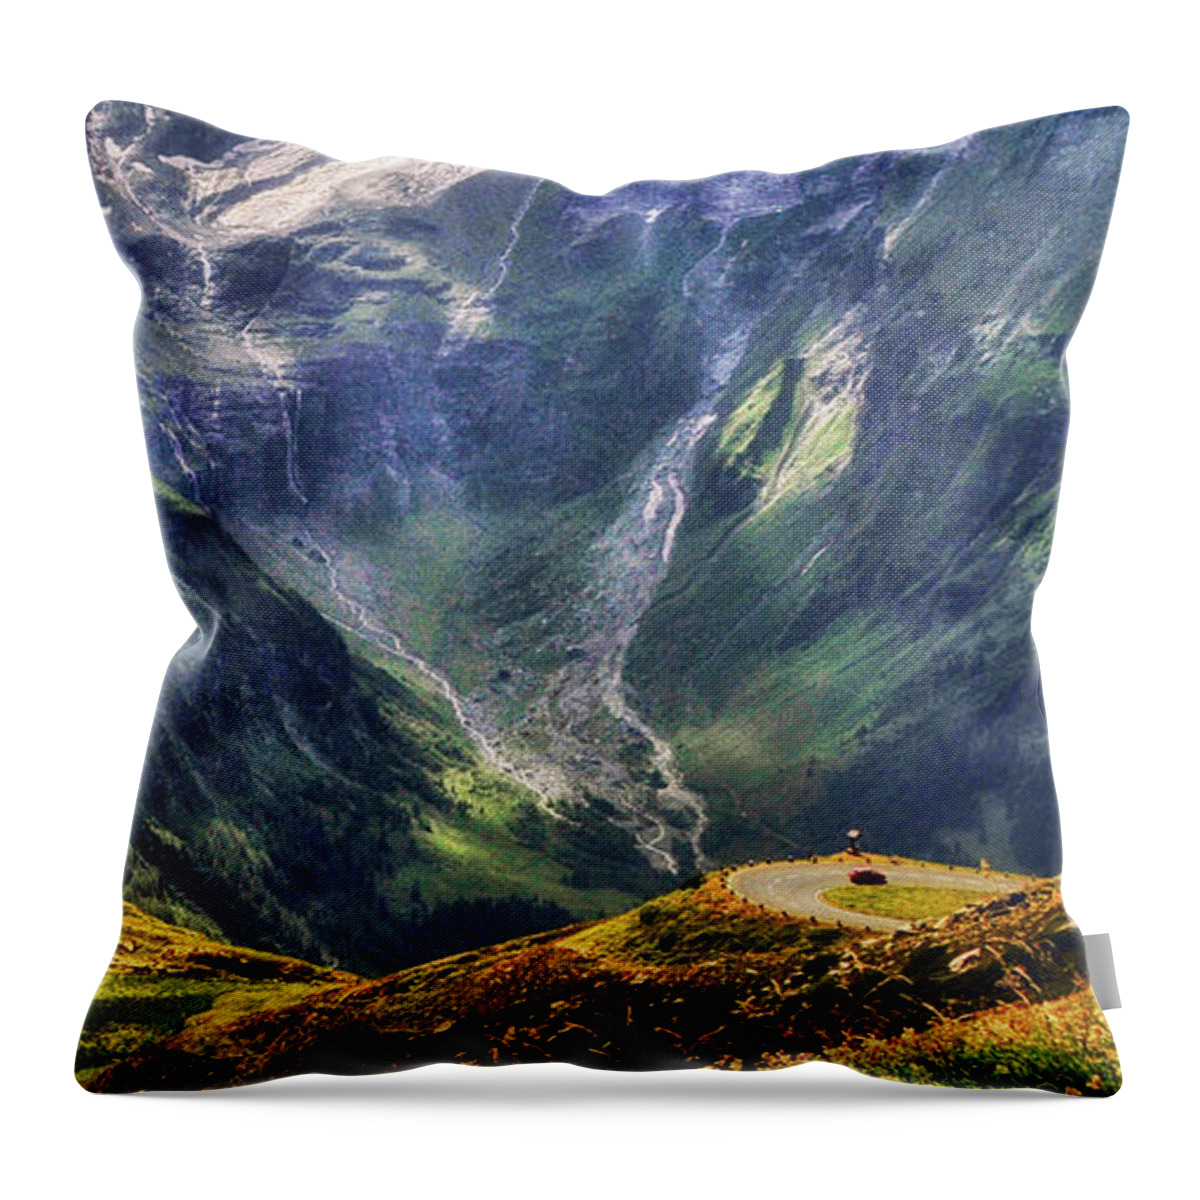 Landscapes Throw Pillow featuring the photograph Hohe Tauern National Park Austria by Gerlinde Keating - Galleria GK Keating Associates Inc